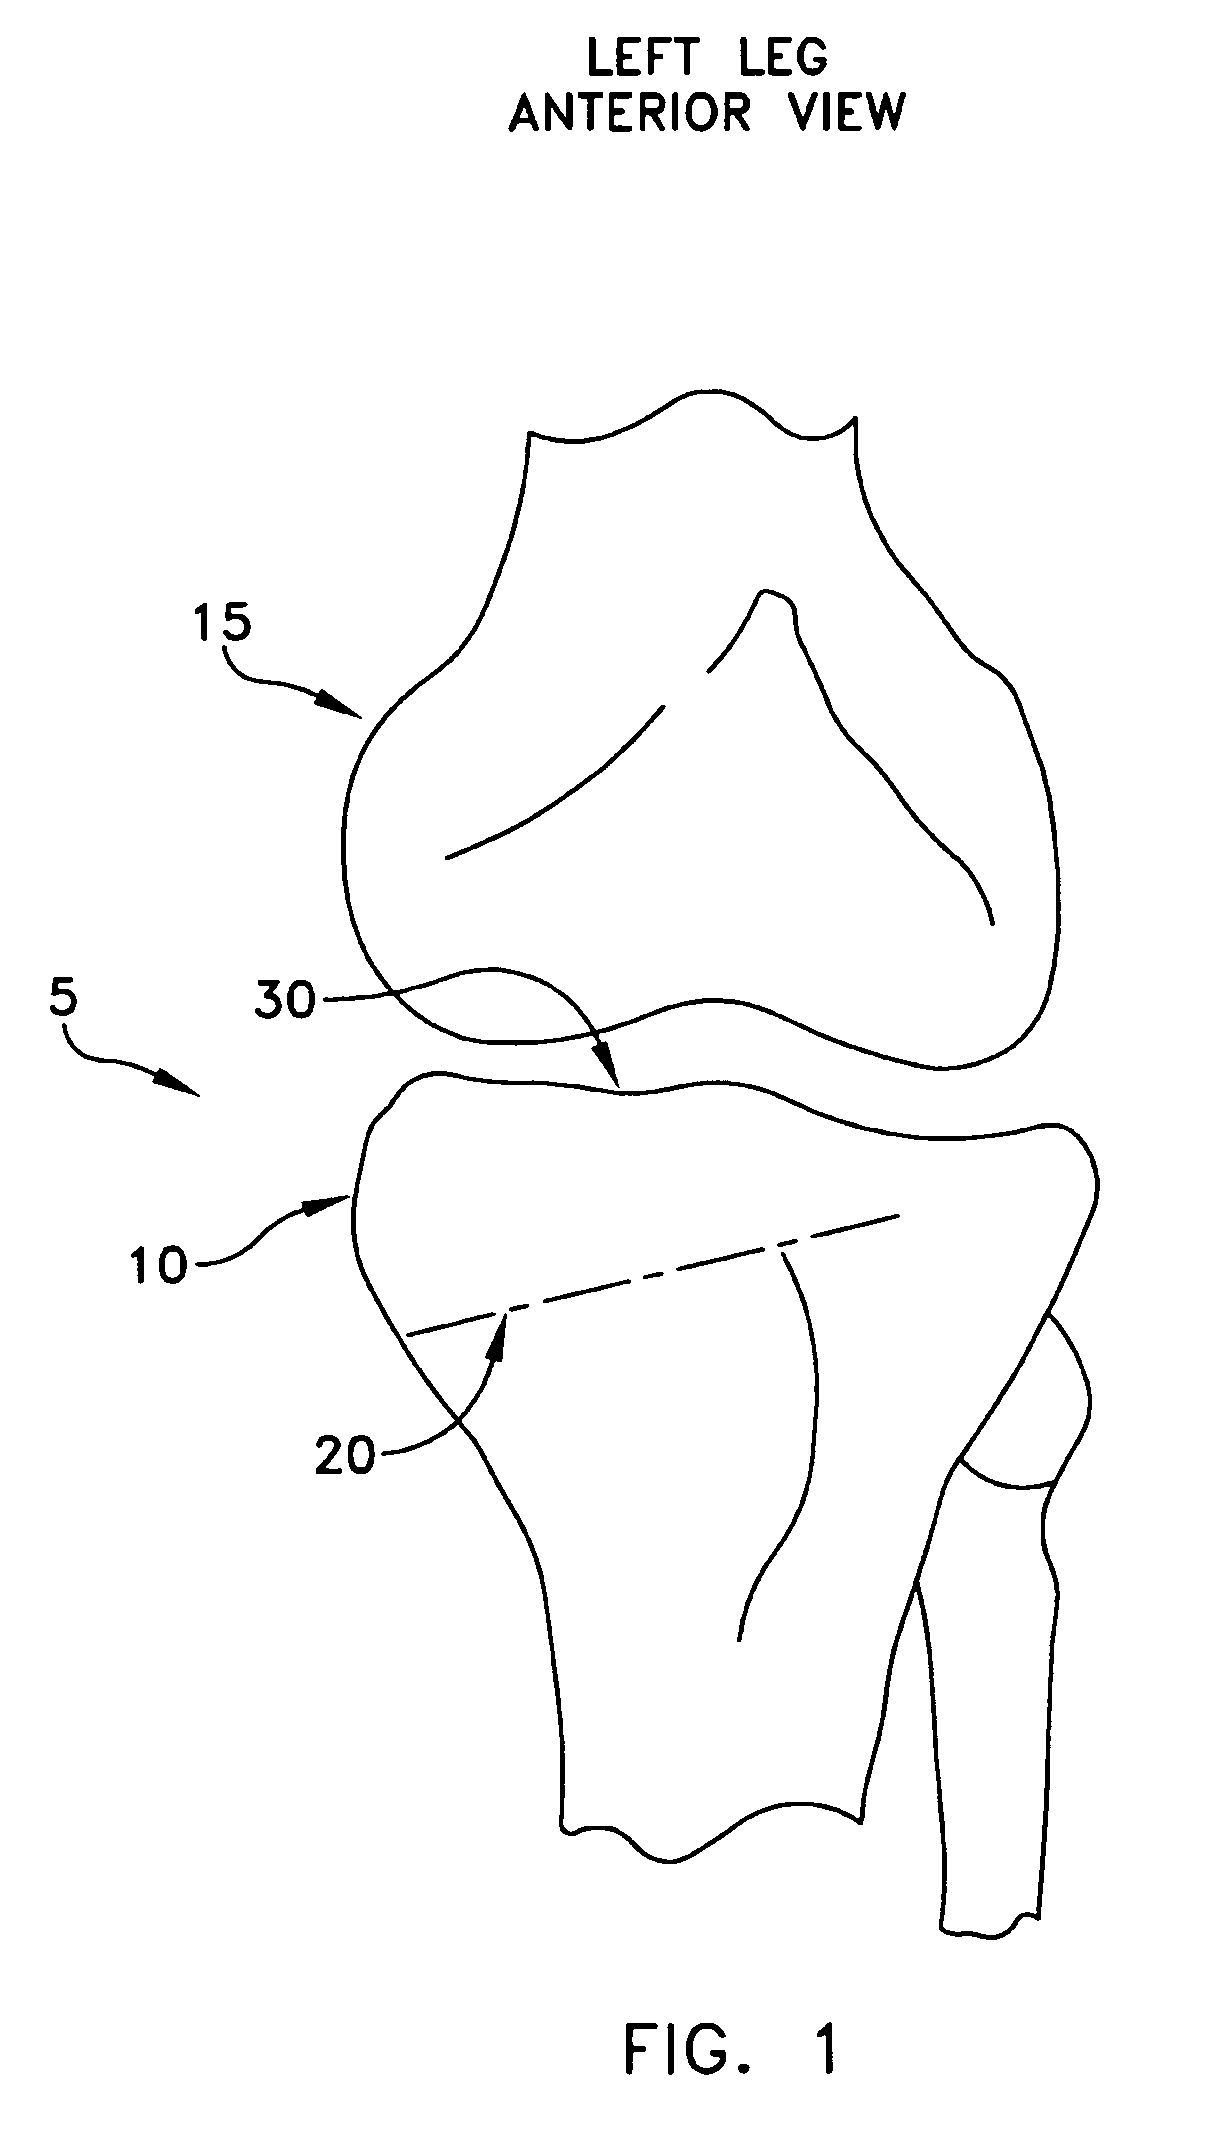 Method and apparatus for forming a wedge-like opening in a bone for an open wedge osteotomy